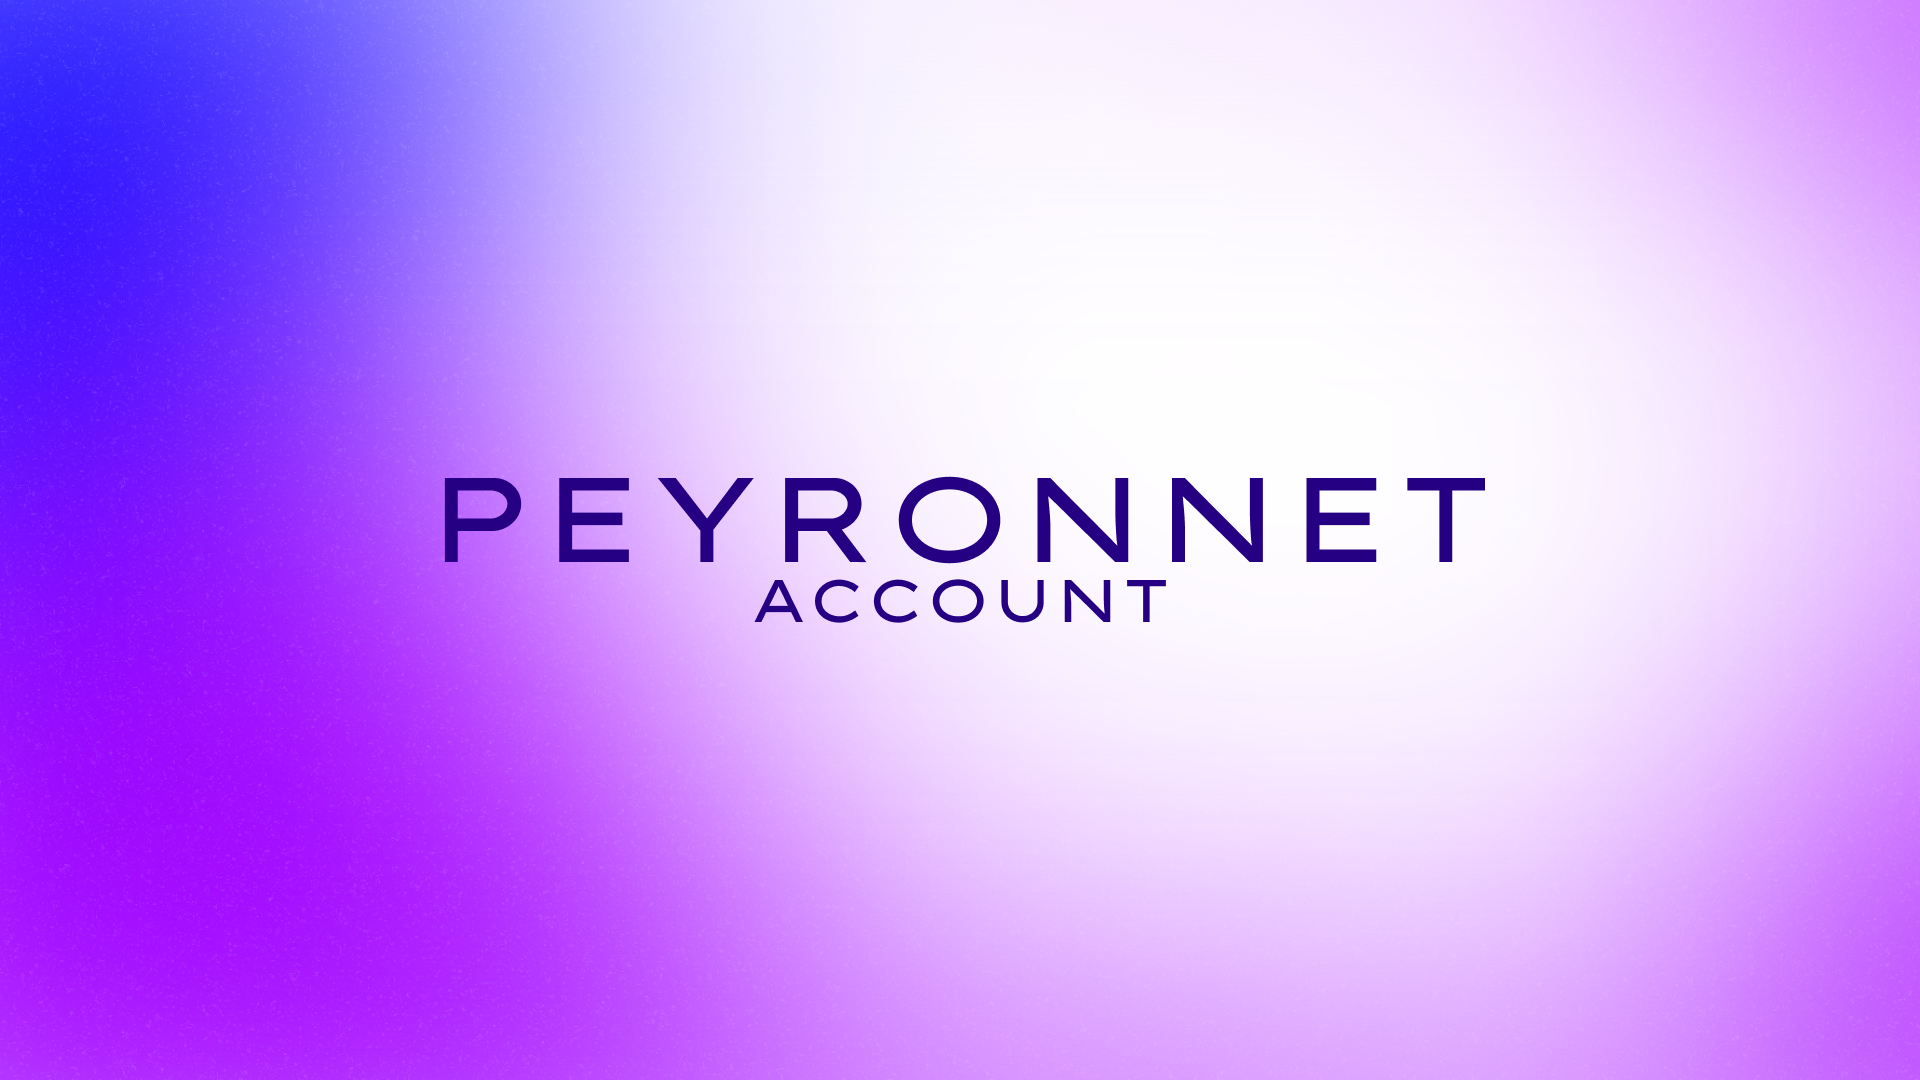 Introducing the Peyronnet Account